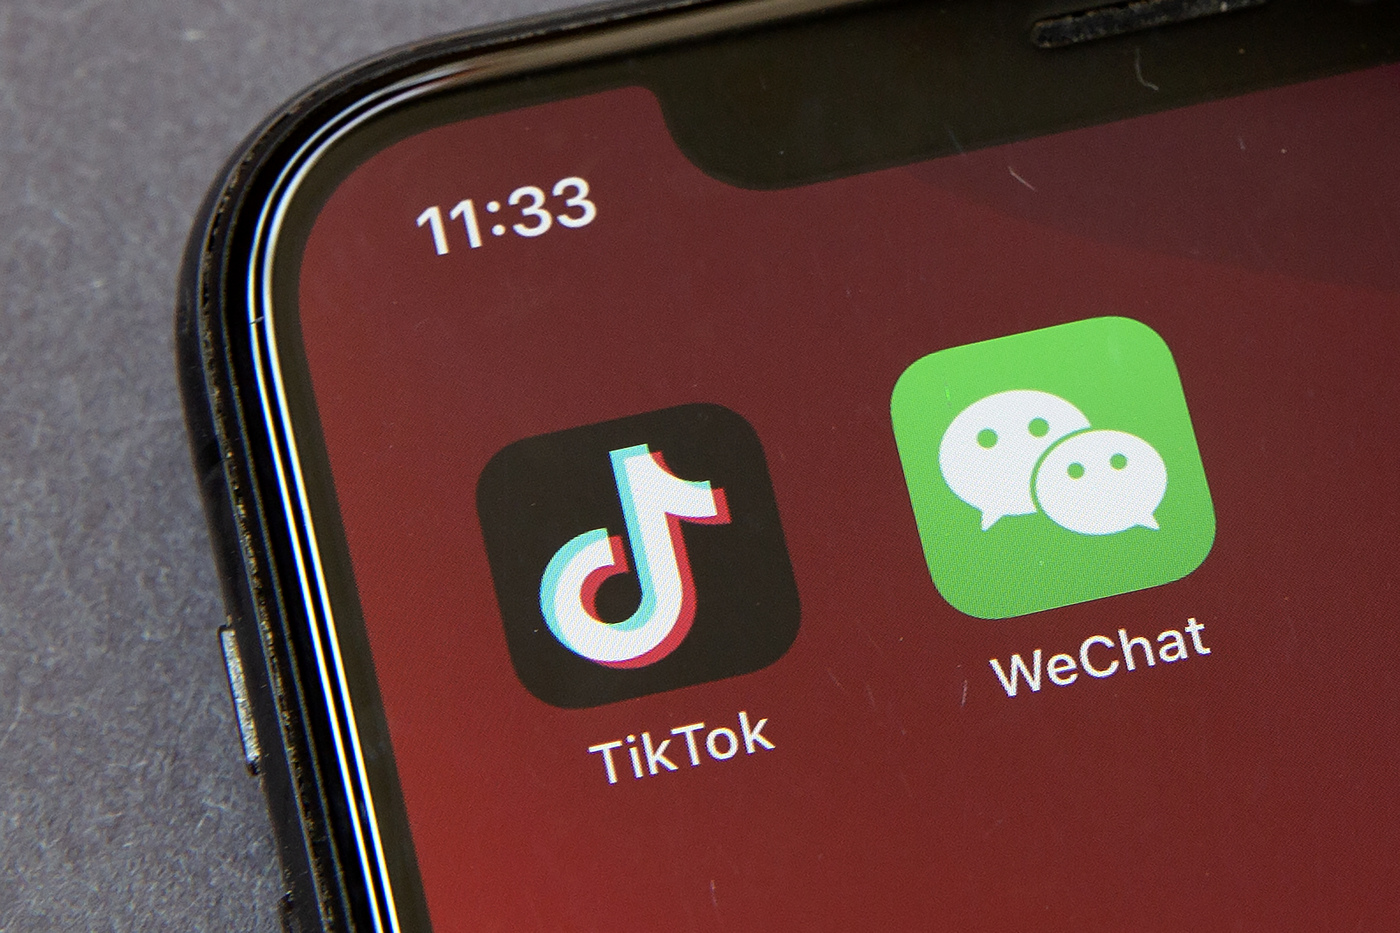 Icons for the smartphone apps TikTok and WeChat are seen on a smartphone screen in Beijing, Friday, Aug. 7, 2020. President Donald Trump has ordered a sweeping but unspecified ban on dealings with the Chinese owners of the consumer apps TikTok and WeChat, although it remains unclear if he has the legal authority to actually ban the apps from the U.S. (AP Photo/Mark Schiefelbein)